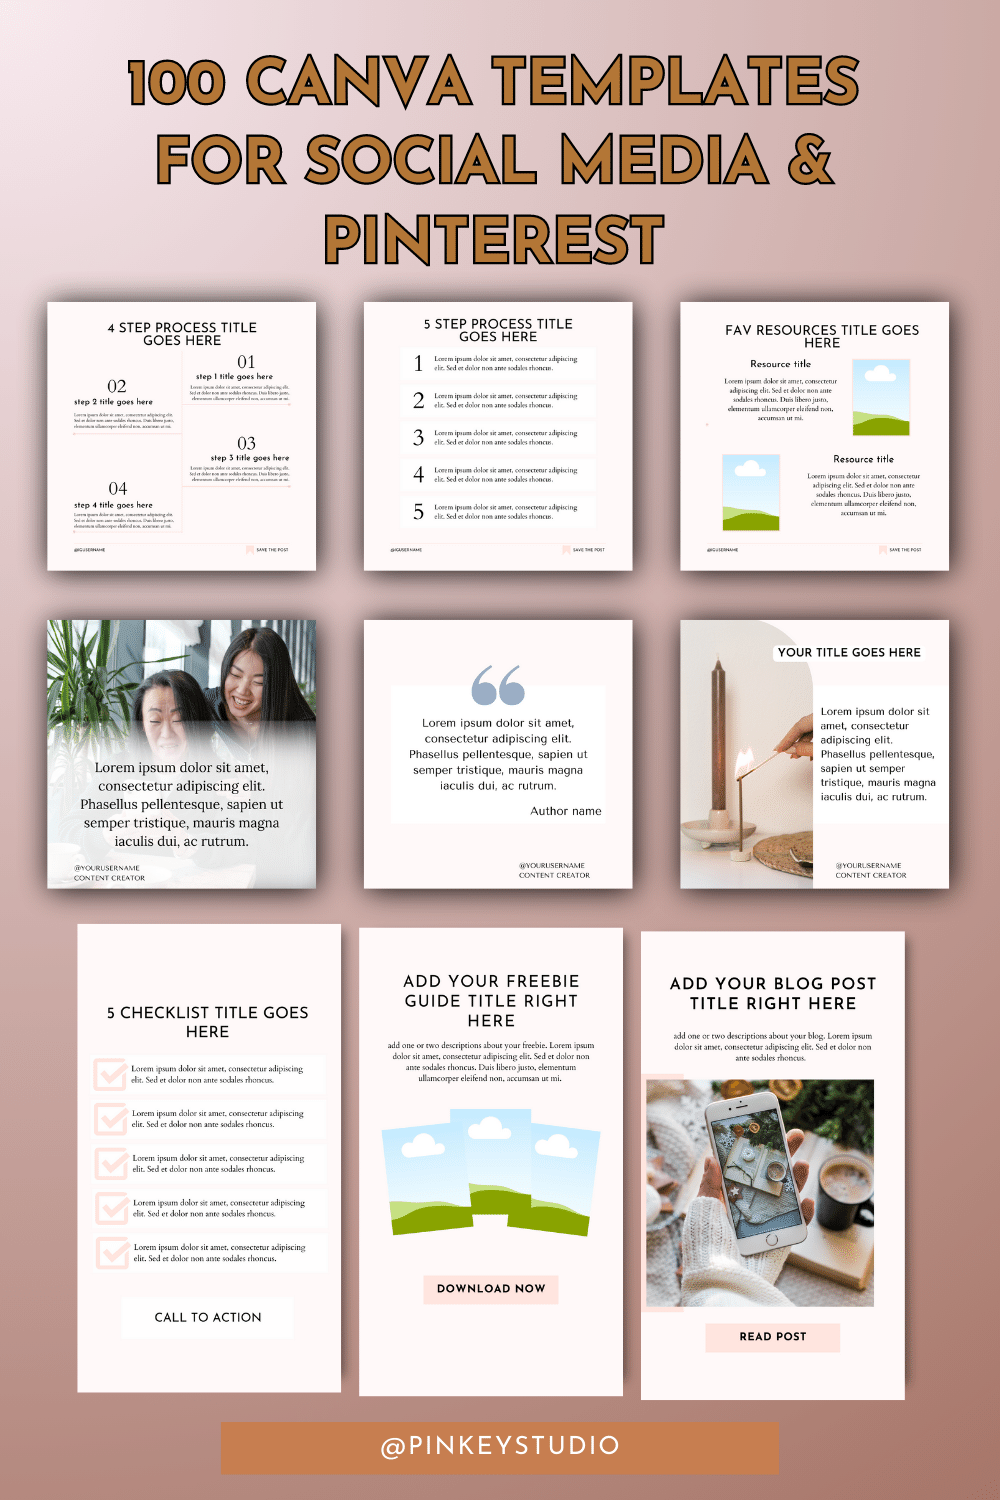 100 Social Media Canva Templates | Instagram Posts & Story | Pinterest Templates | instagram story Highlights covers pinterest preview image.